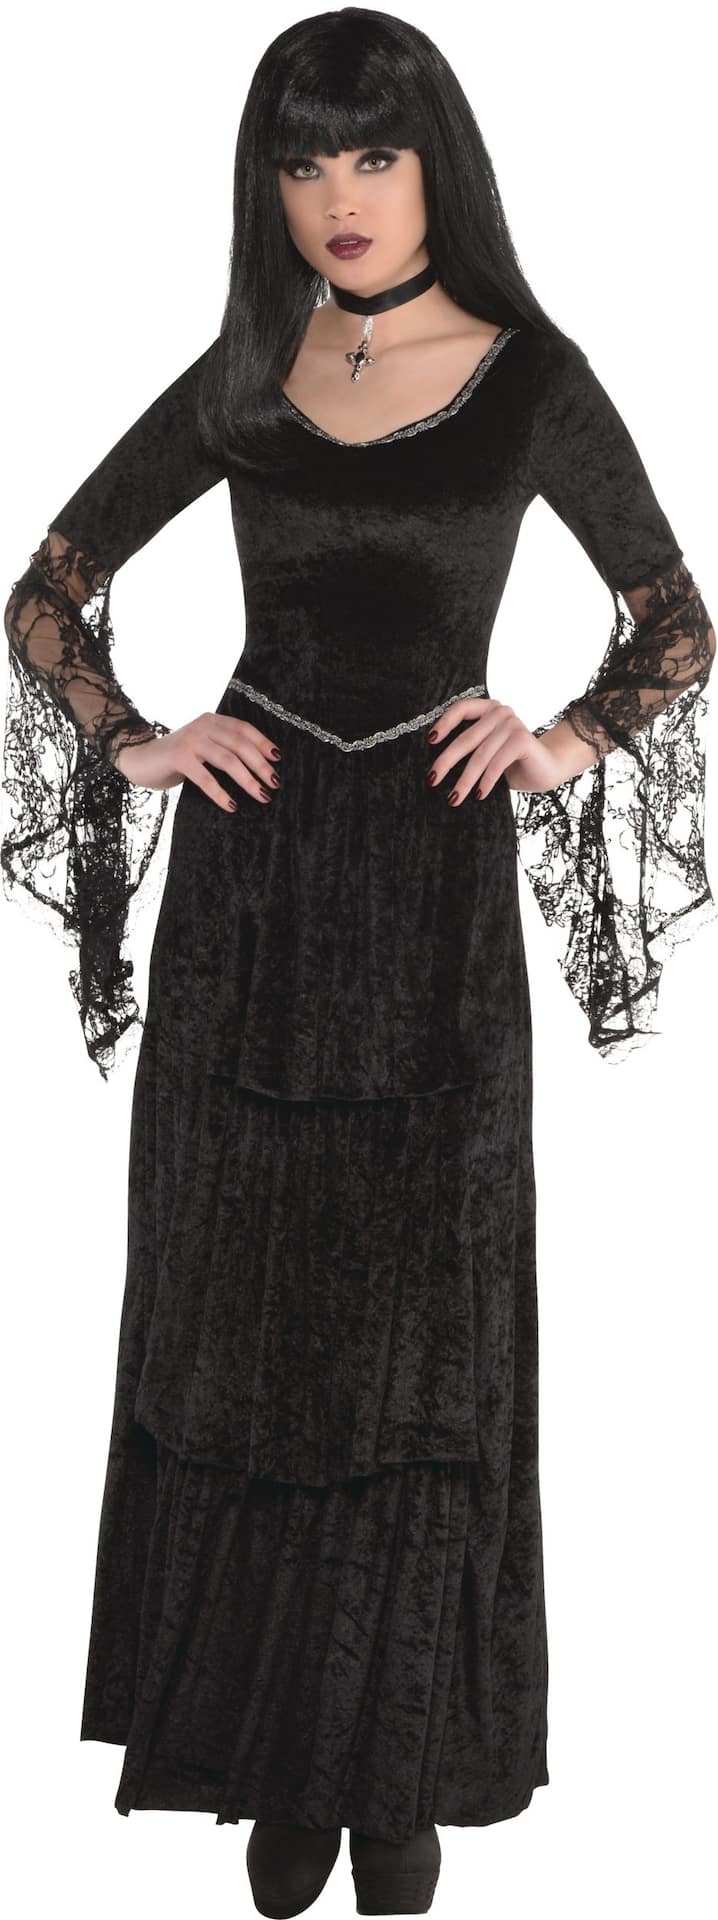 https://media-www.canadiantire.ca/product/seasonal-gardening/party-city-seasonal/party-city-halloween-and-fall-decor/8515453/girl-gothic-temptress-costume-small-af7b3455-b071-497f-88c5-923d4398f07a-jpgrendition.jpg